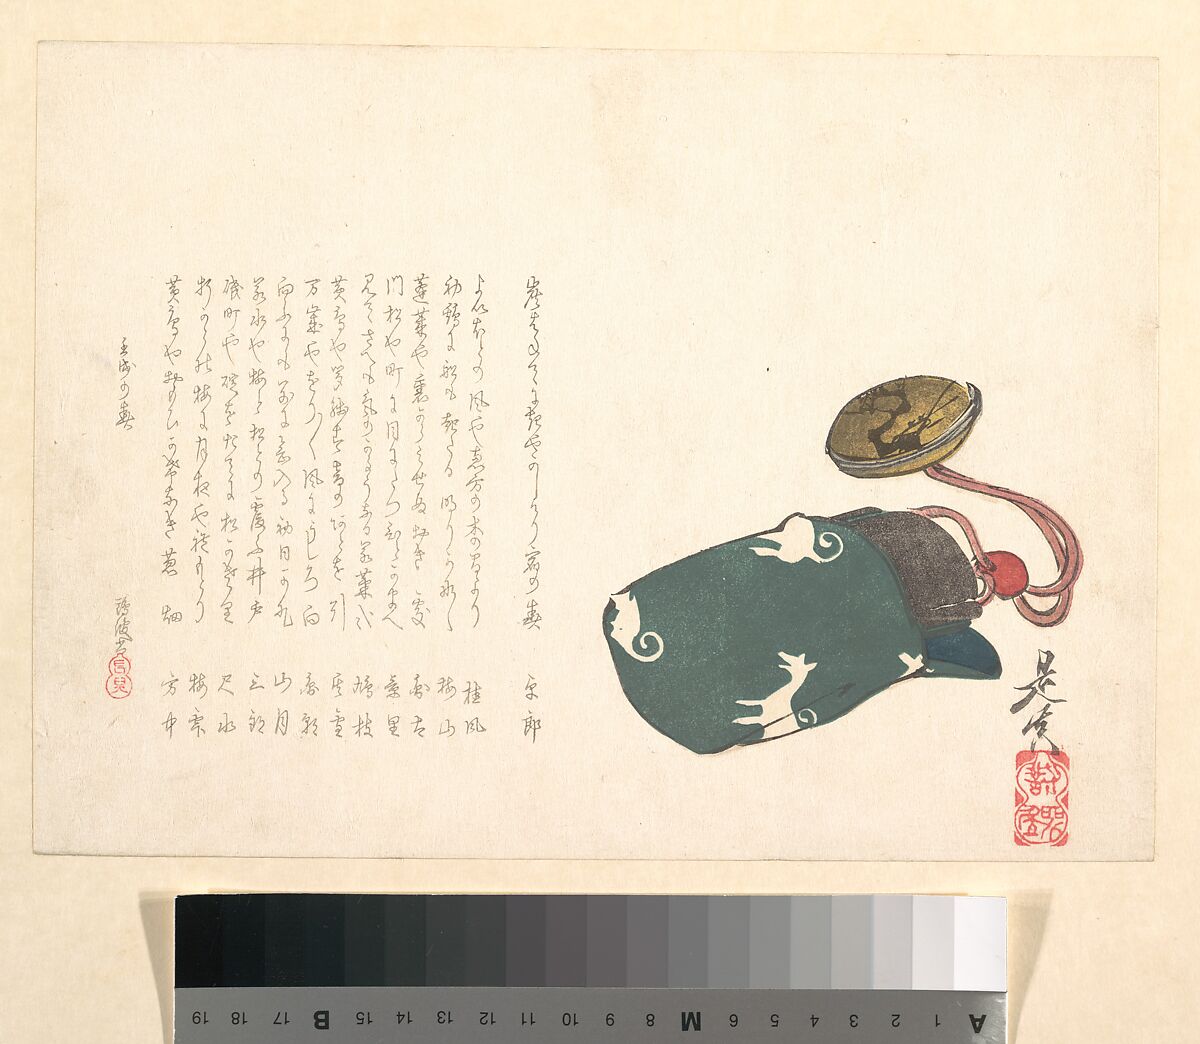 Inrō Partly in a Green Bag with Pattern of White Foxes, Shibata Zeshin (Japanese, 1807–1891), Woodblock print (surimono); ink and color on paper, Japan 